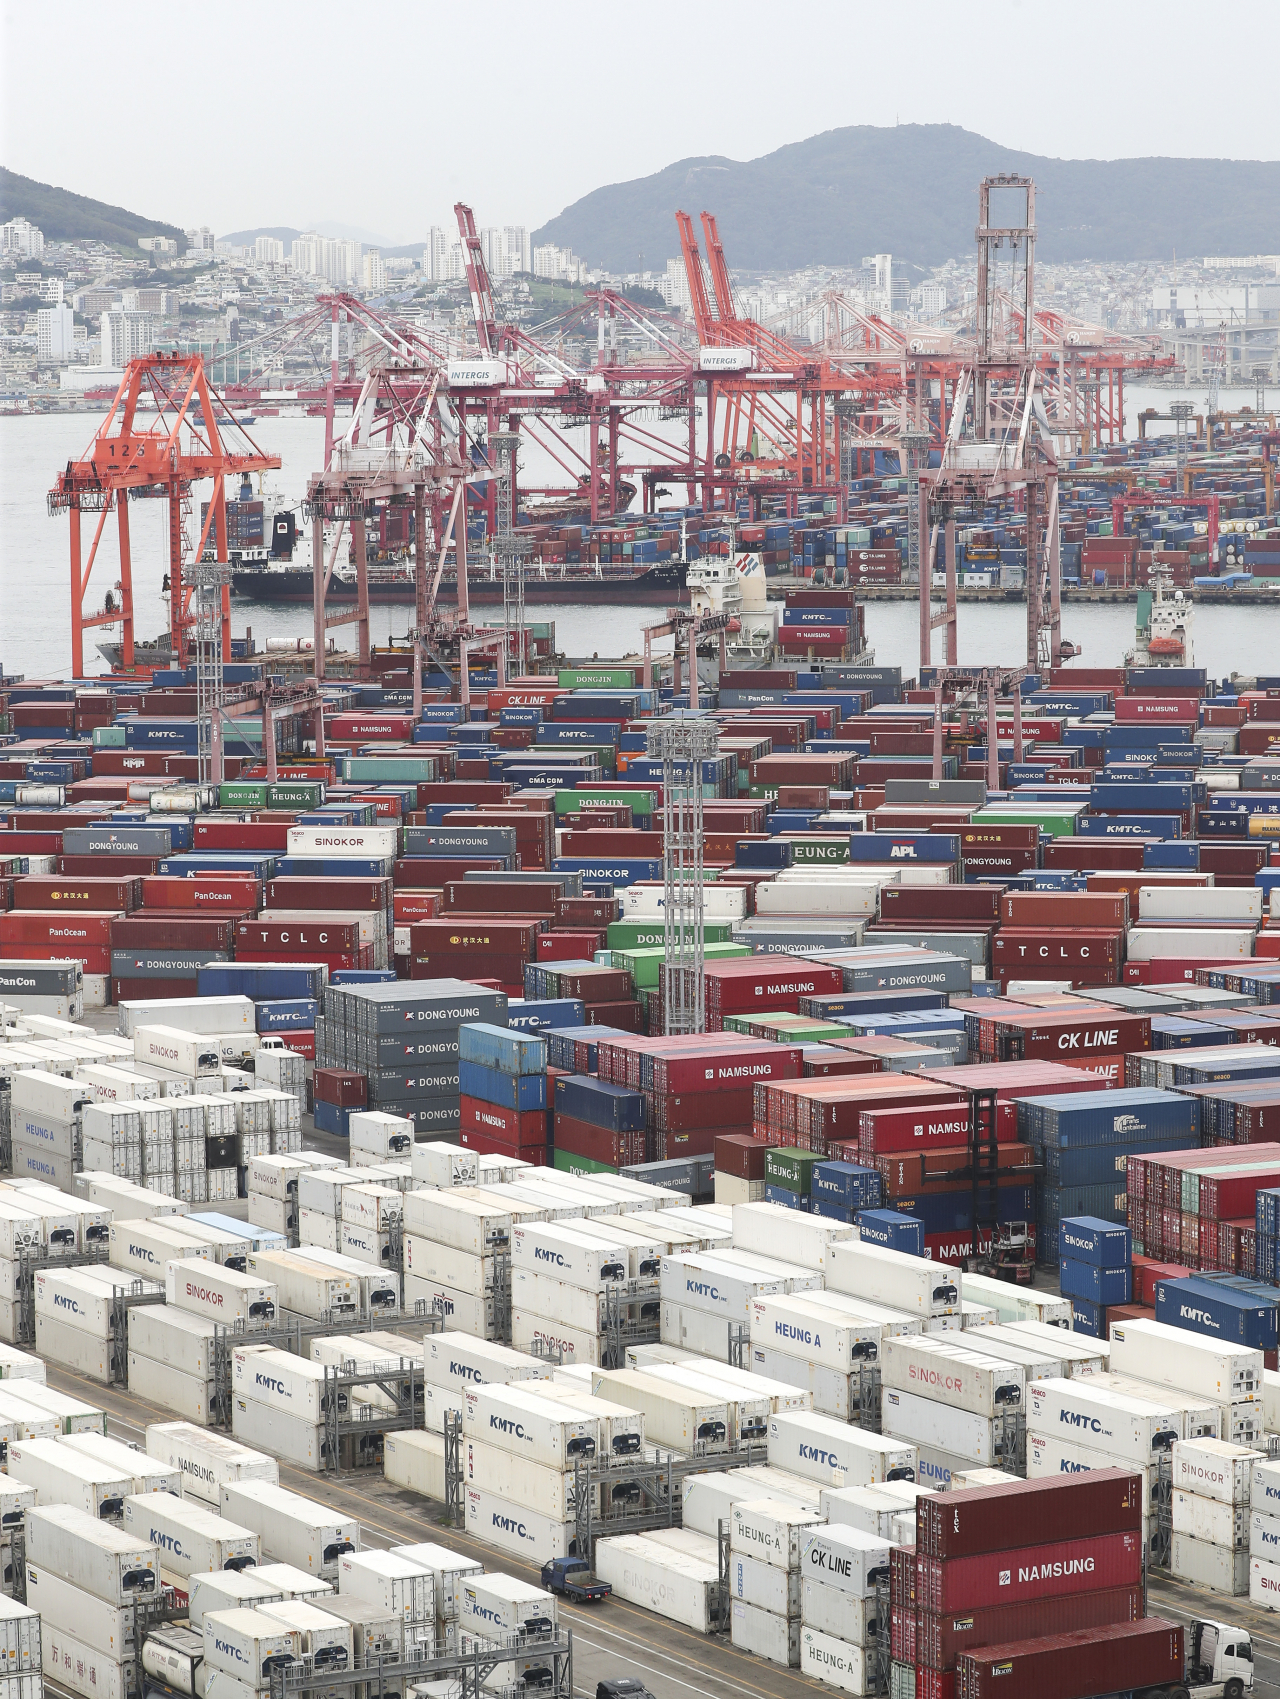 Inbound containers are stacked up at Gamman Quay in Busan last Thursday. South Korea posted a trade deficit of $9.47 billion in August, the largest amount to date, on soaring global energy prices, with its exports and imports coming in at $56.67 billion and $66.15 billion, respectively. (Yonhap)